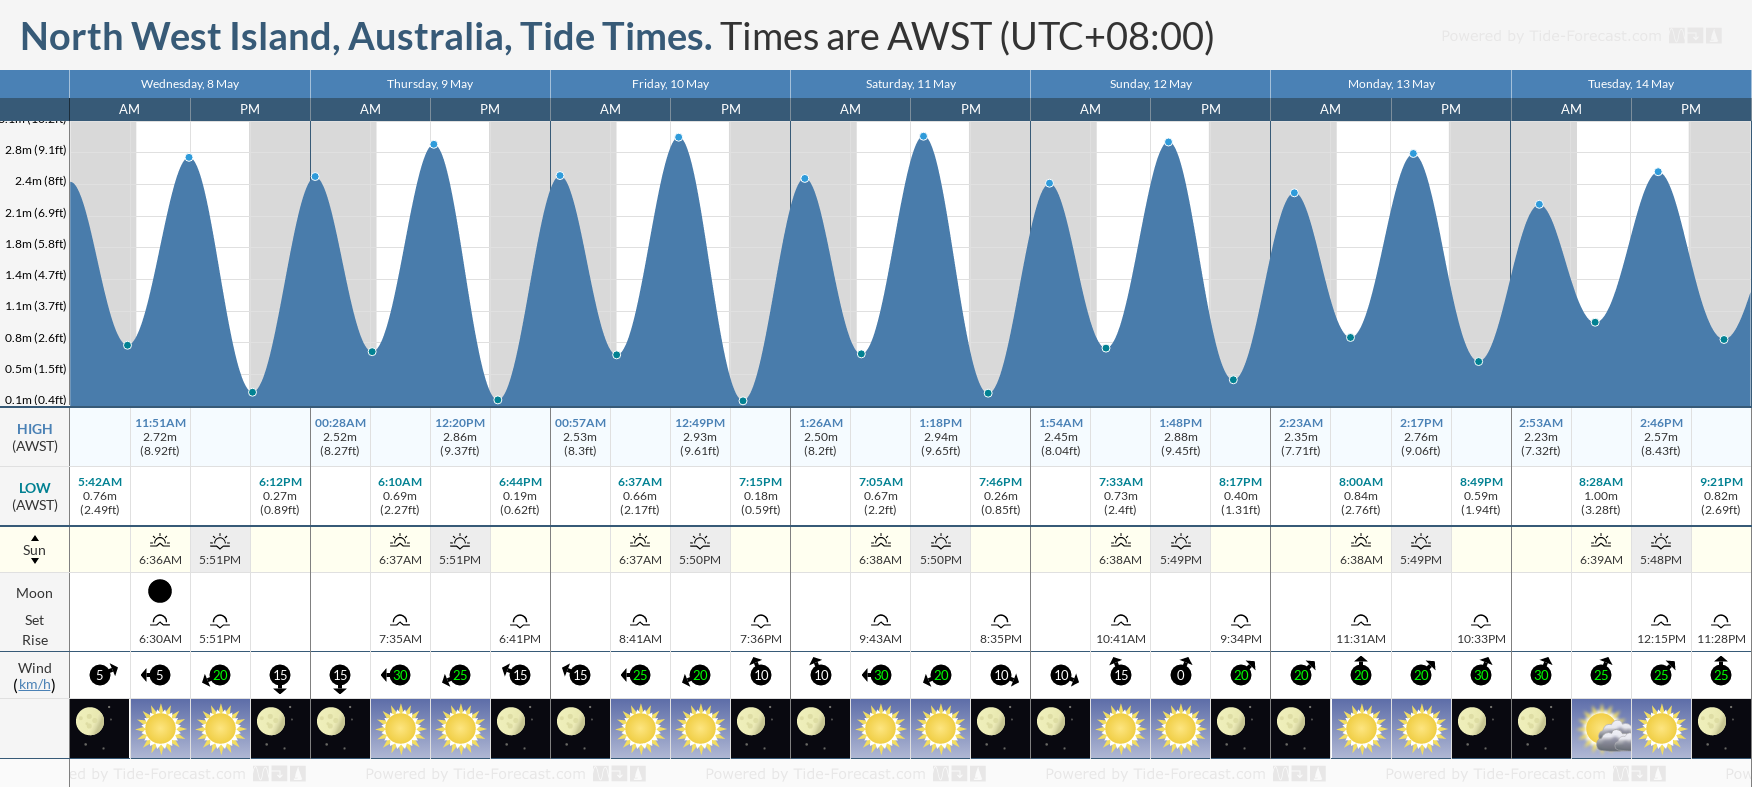 North West Island, Australia Tide Chart including high and low tide tide times for the next 7 days